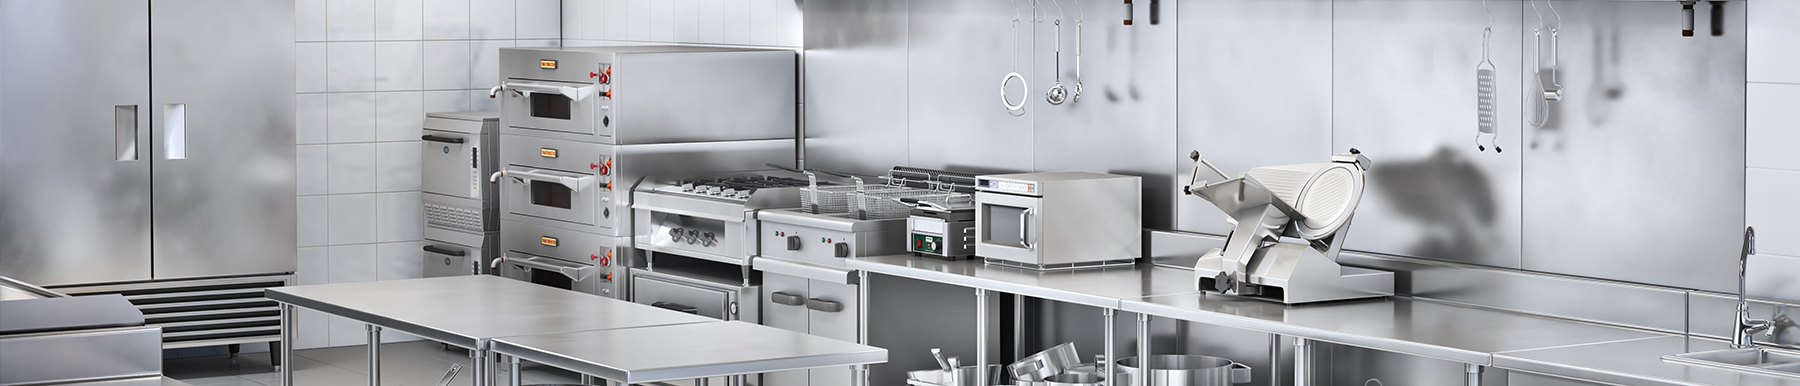 Catering Equipment Suppliers Near Milton Keynes | H2 Catering Equipment Catering Equipment